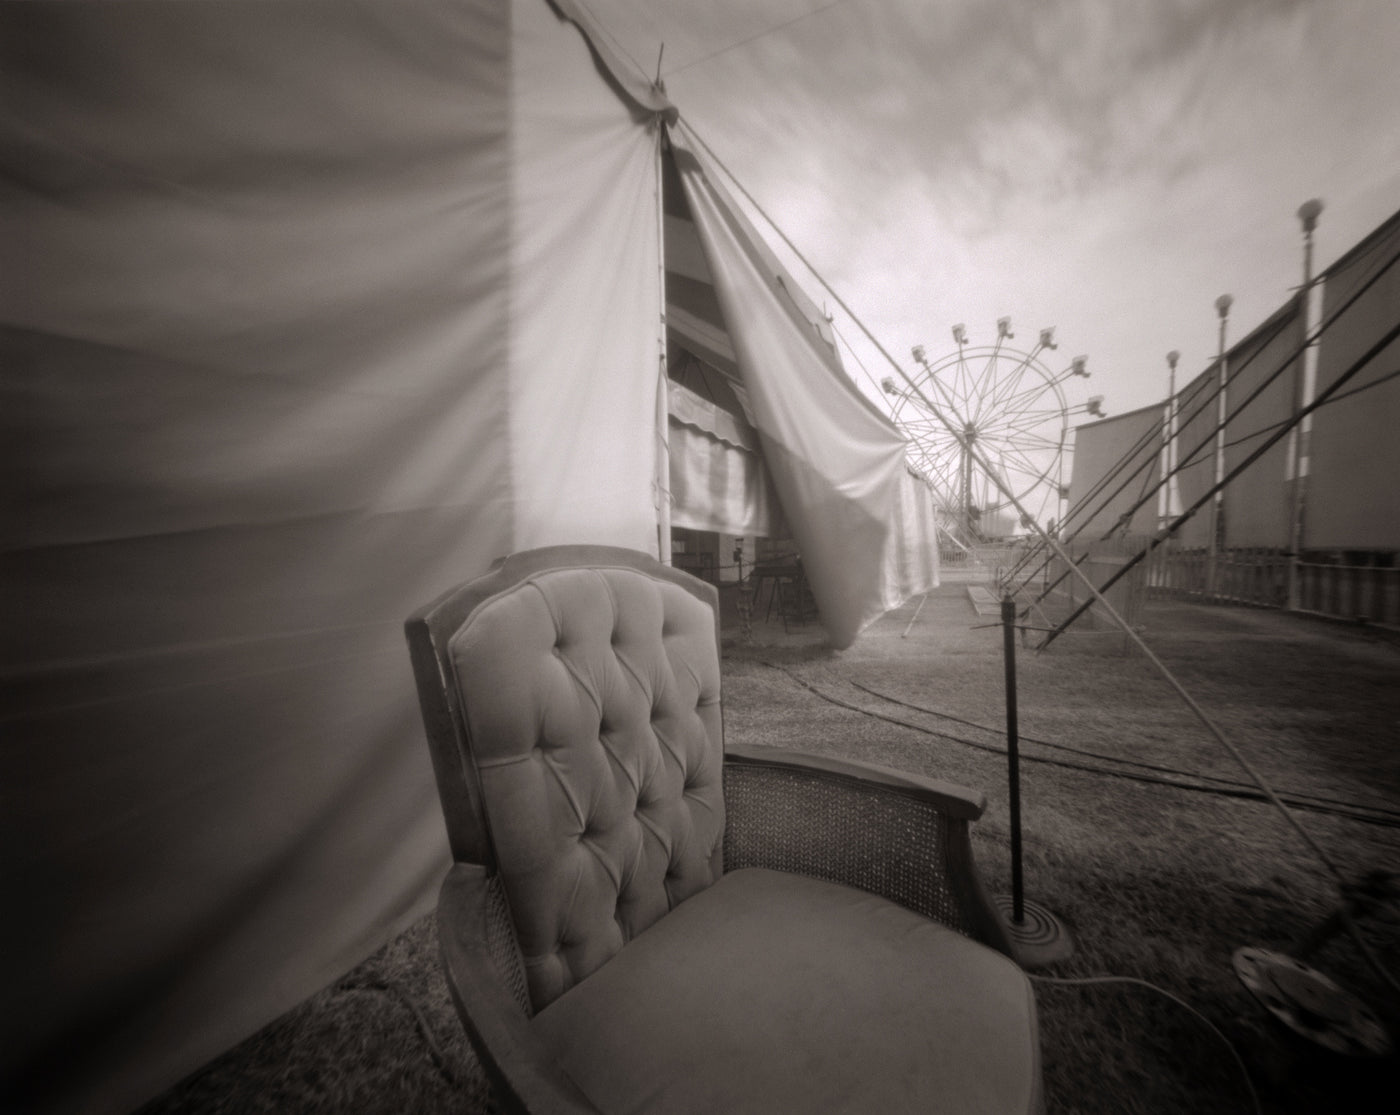 Remembering The Carnivalesque Through Pinhole Photography